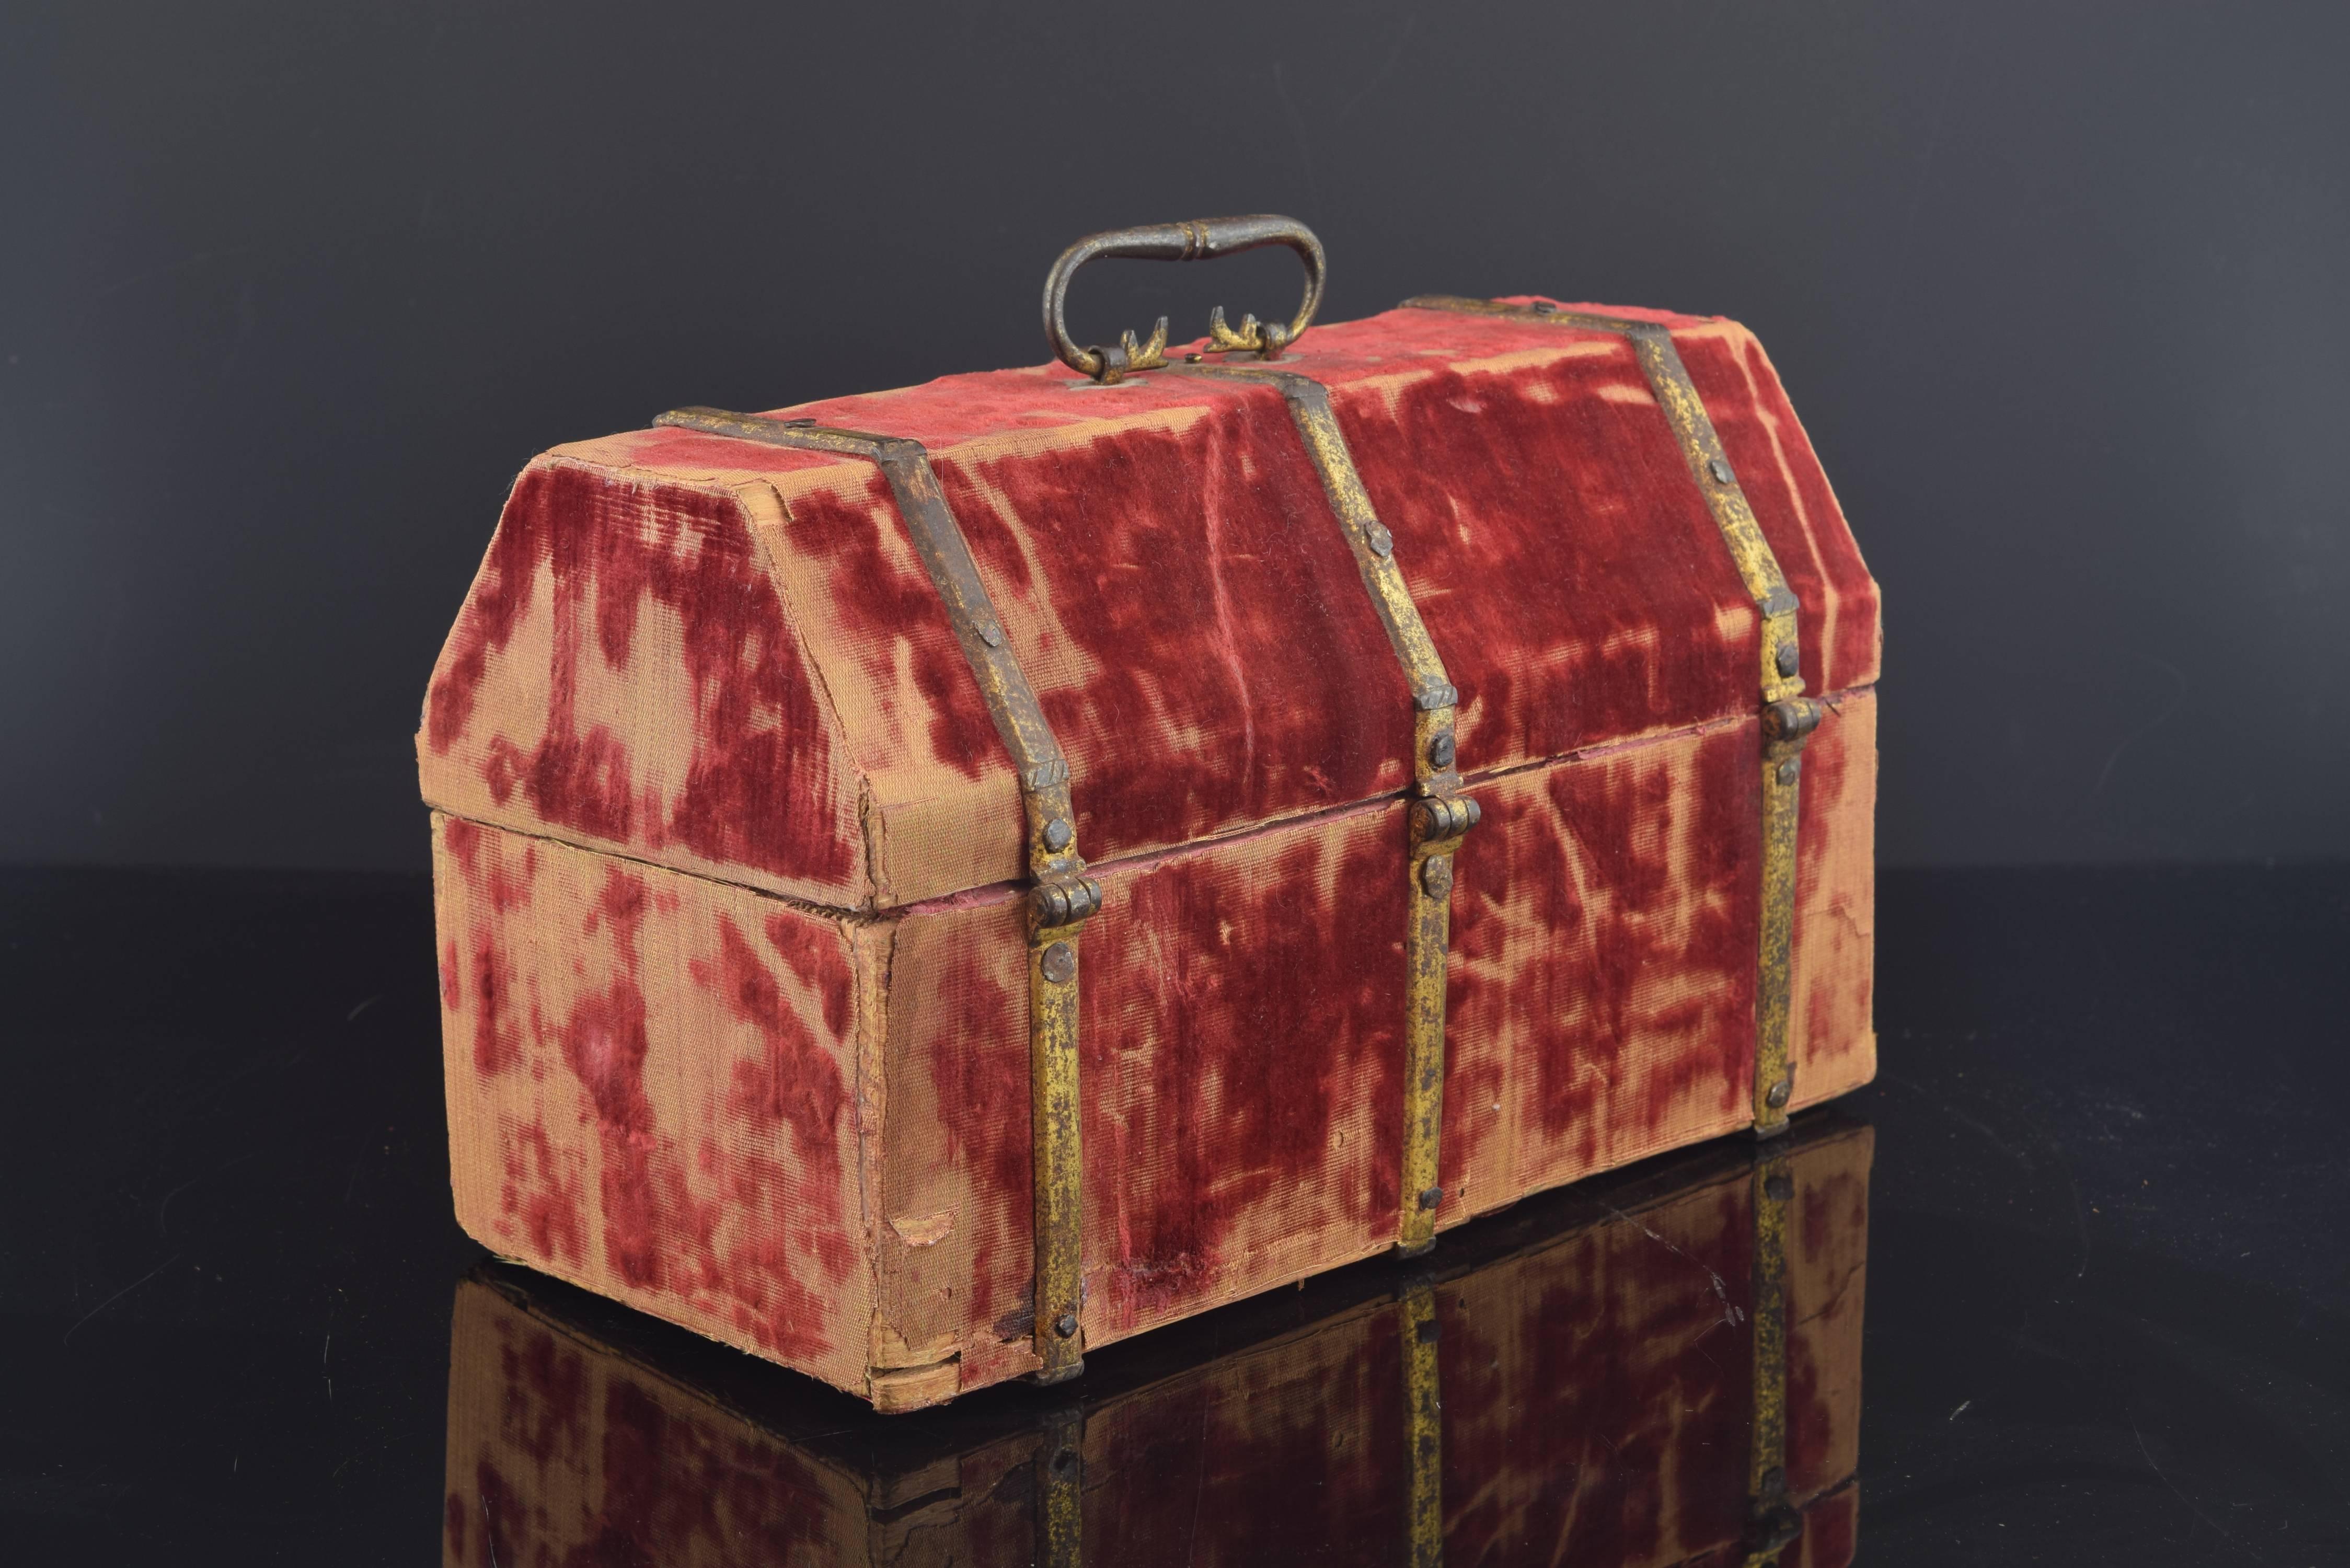 Spanish Chest Wood, Covered in Red Velvet, and Gold Iron, Spain, 16th Century